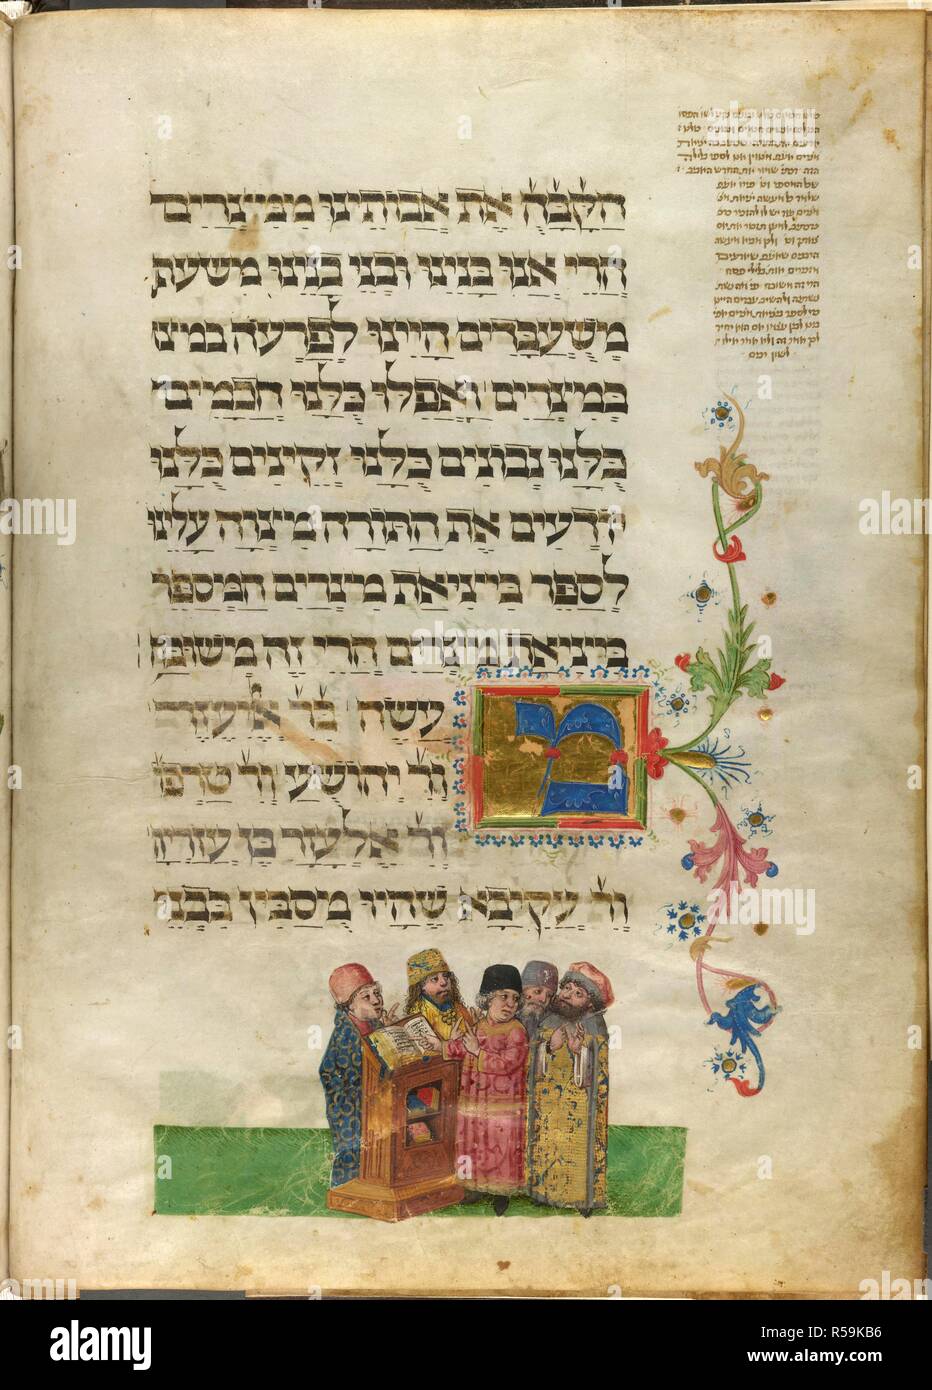 Five Rabbis at Bnei Brak. The Ashkenazi Haggadah (Feibusch Haggadah). South Germany, c.1460-1475. Five Rabbis at Bnei Brak. Vellum manuscript.  Image taken from The Ashkenazi Haggadah (Feibusch Haggadah).  Originally published/produced in South Germany, c.1460-1475. . Source: Add. 14762, f.7v. Language: Hebrew. Author: Feibusch, Joel ben Simeon. Stock Photo